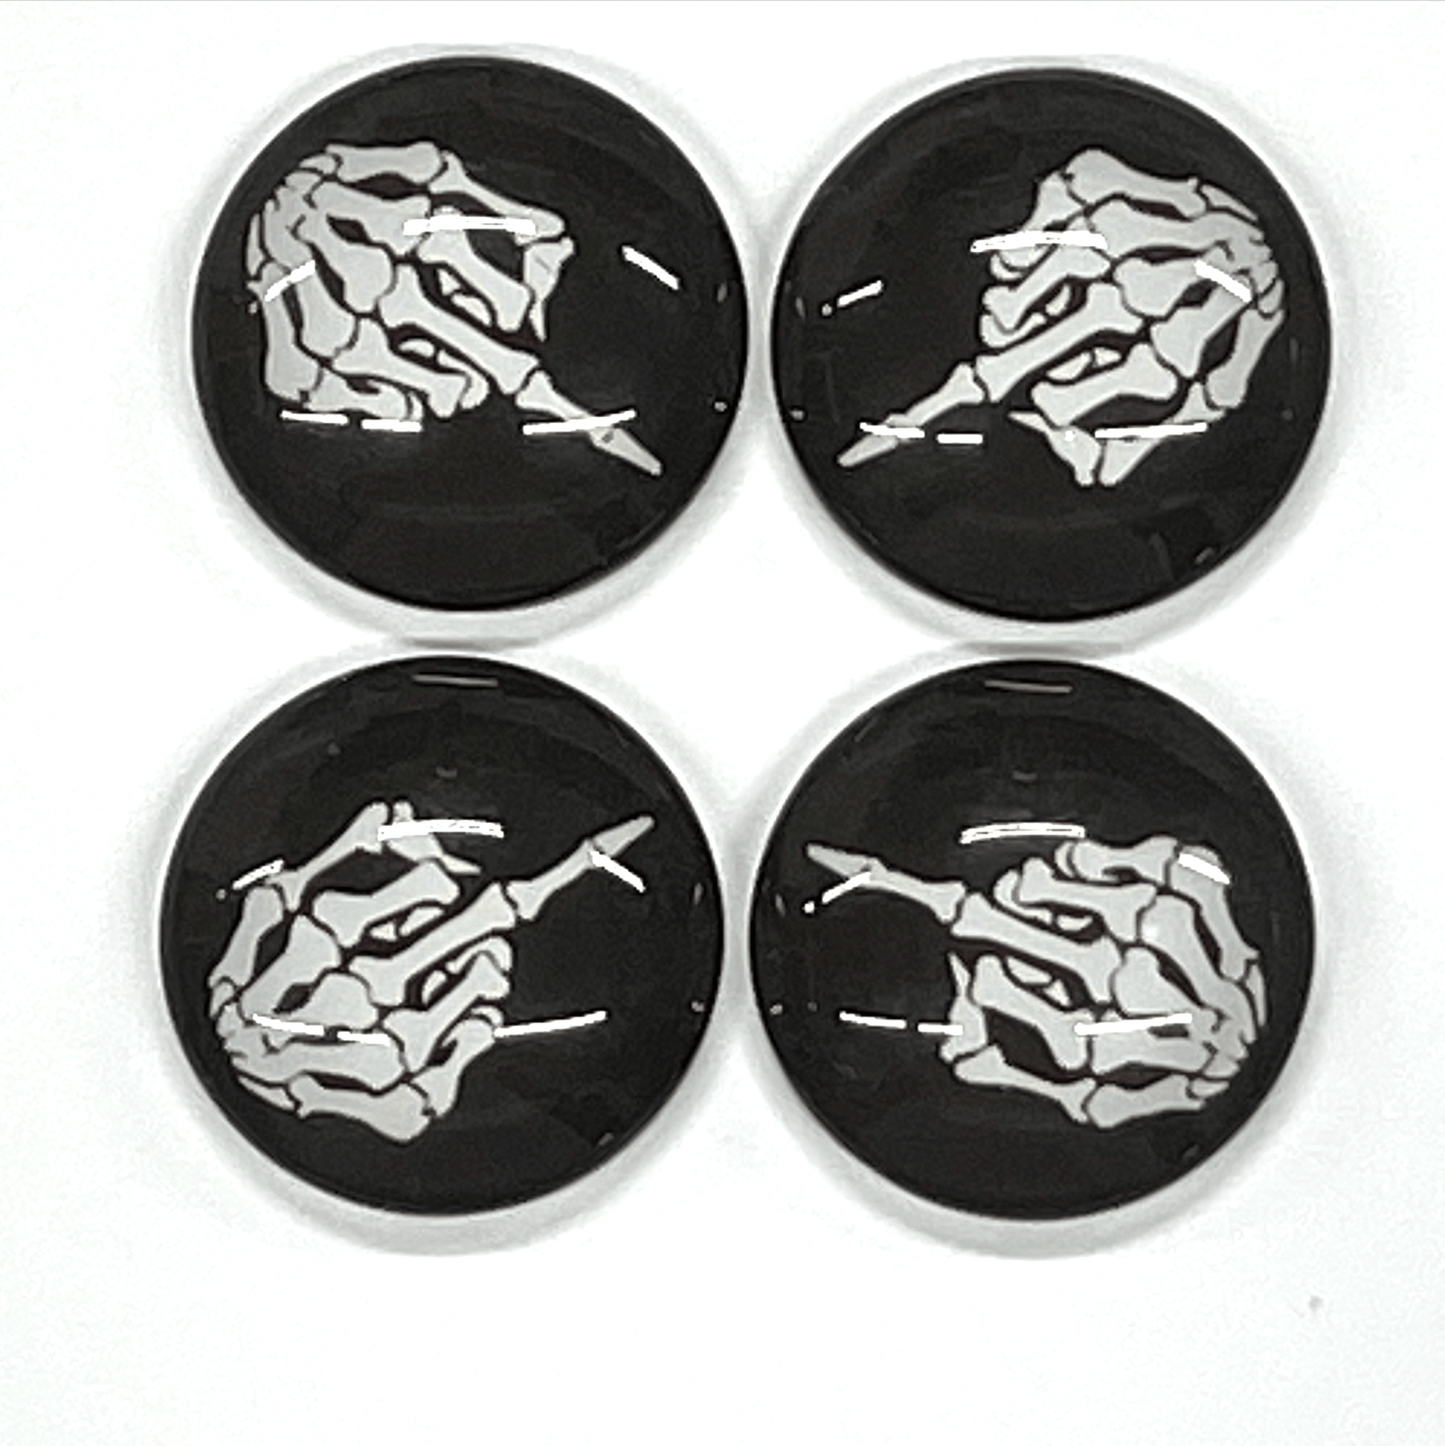 Sundaylace Creations & Bling Resin Gems 20mm "Skeleton points to the sky" Halloween on black background round, Glue on Acrylic Printed Resin Gem (Sold in Pair)